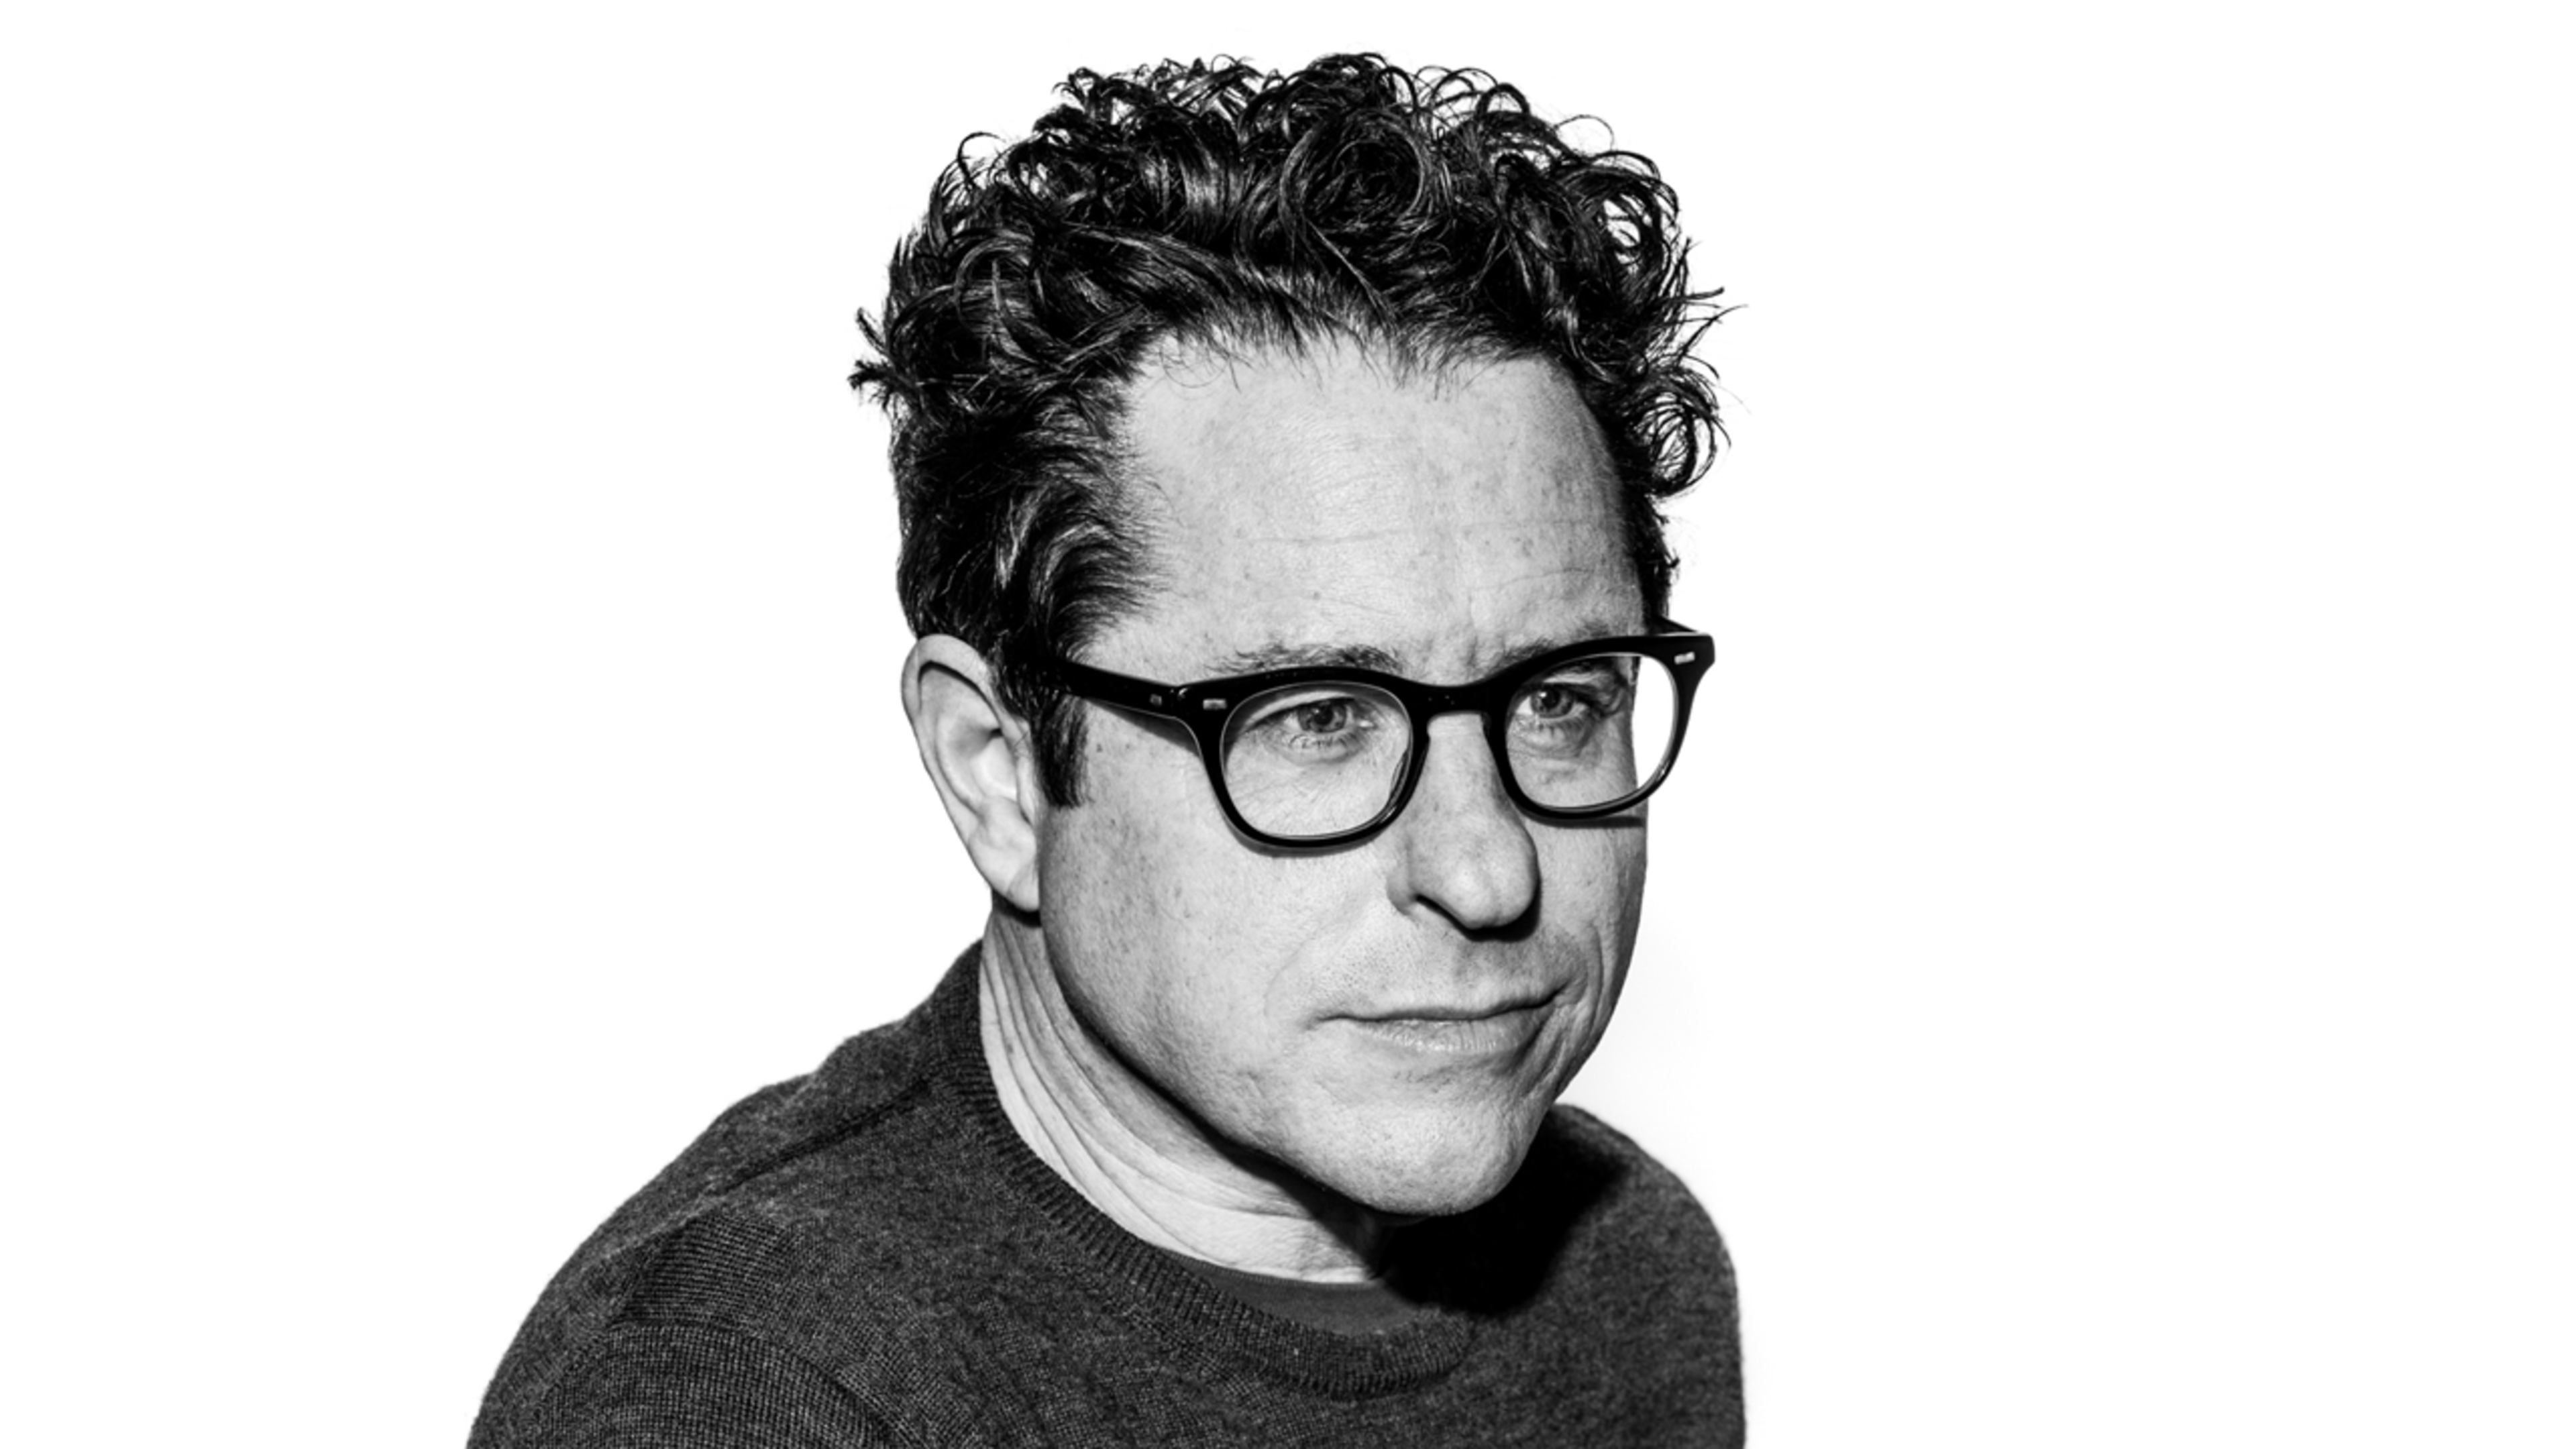 Exclusive: J.J. Abrams on Star Wars, Apple, and building Bad Robot into a Hollywood force